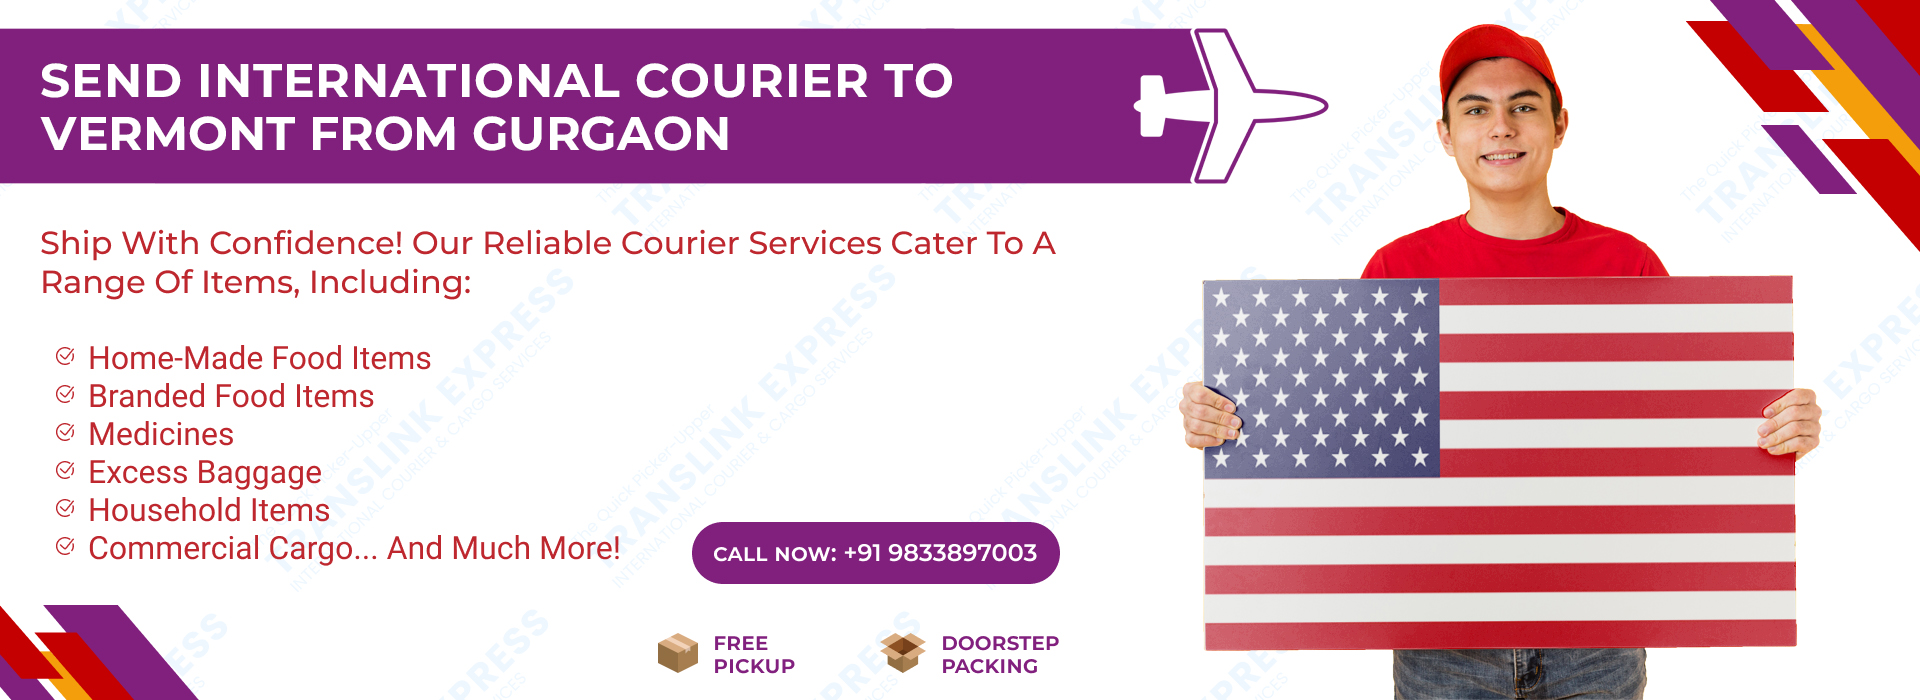 Courier to Vermont From Gurgaon